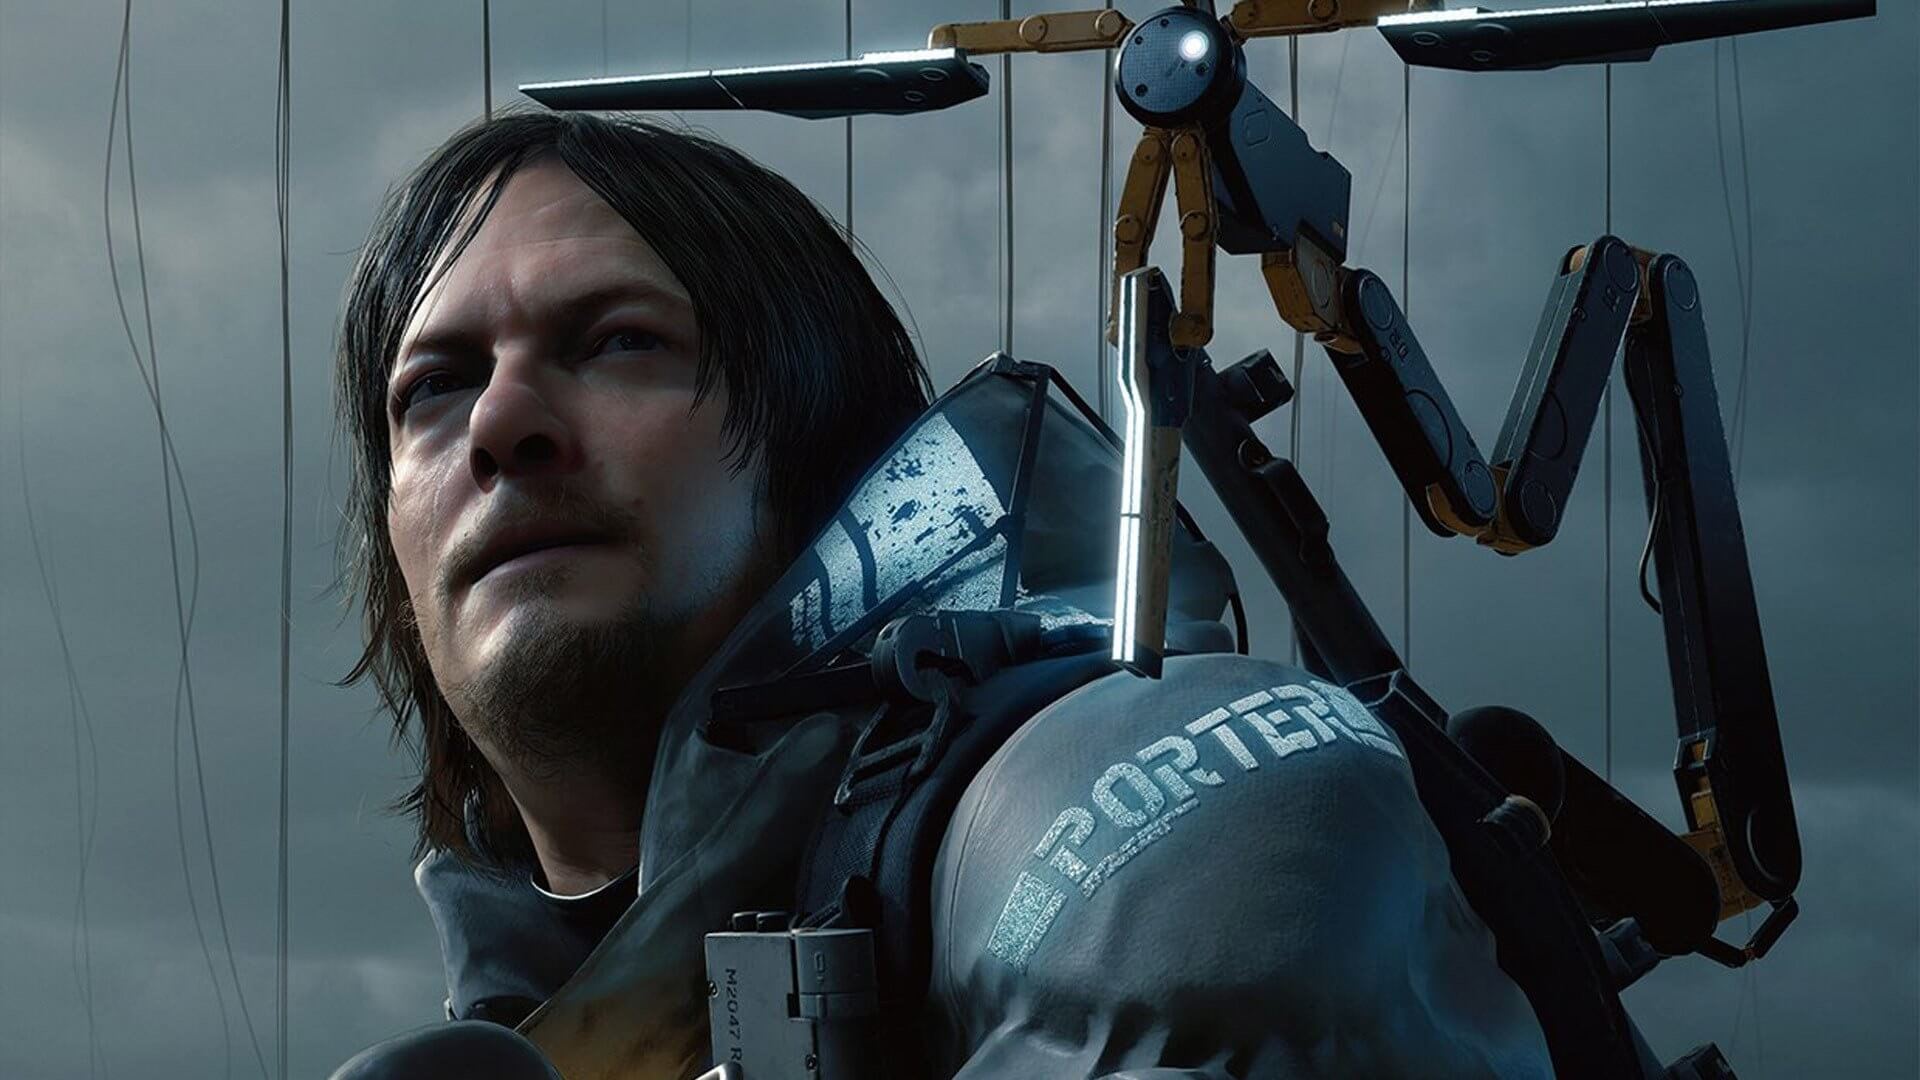 Amazing Death Stranding is a miracle, says Metal Gear Solid movie director